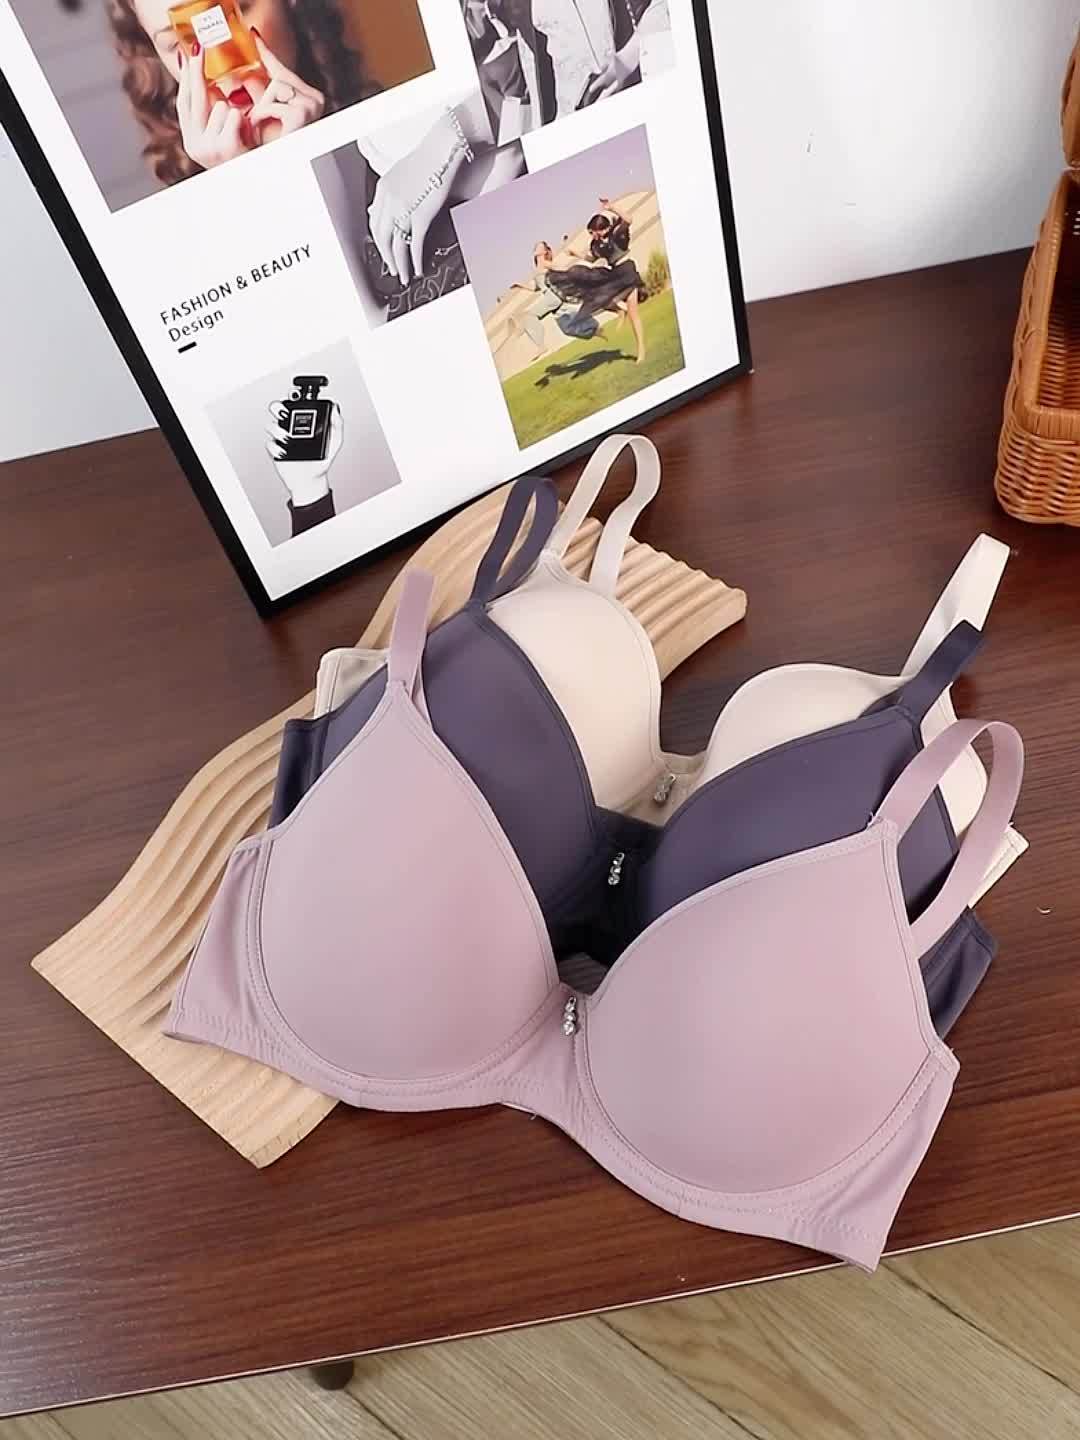 Qiaocaity Bras for Women, Push-up Bra, Womens Lingerie, Woman's Solid Color  Comfortable Hollow Out Perspective Bra Underwear No Rims, Gifts for Women,  Beige XXL 